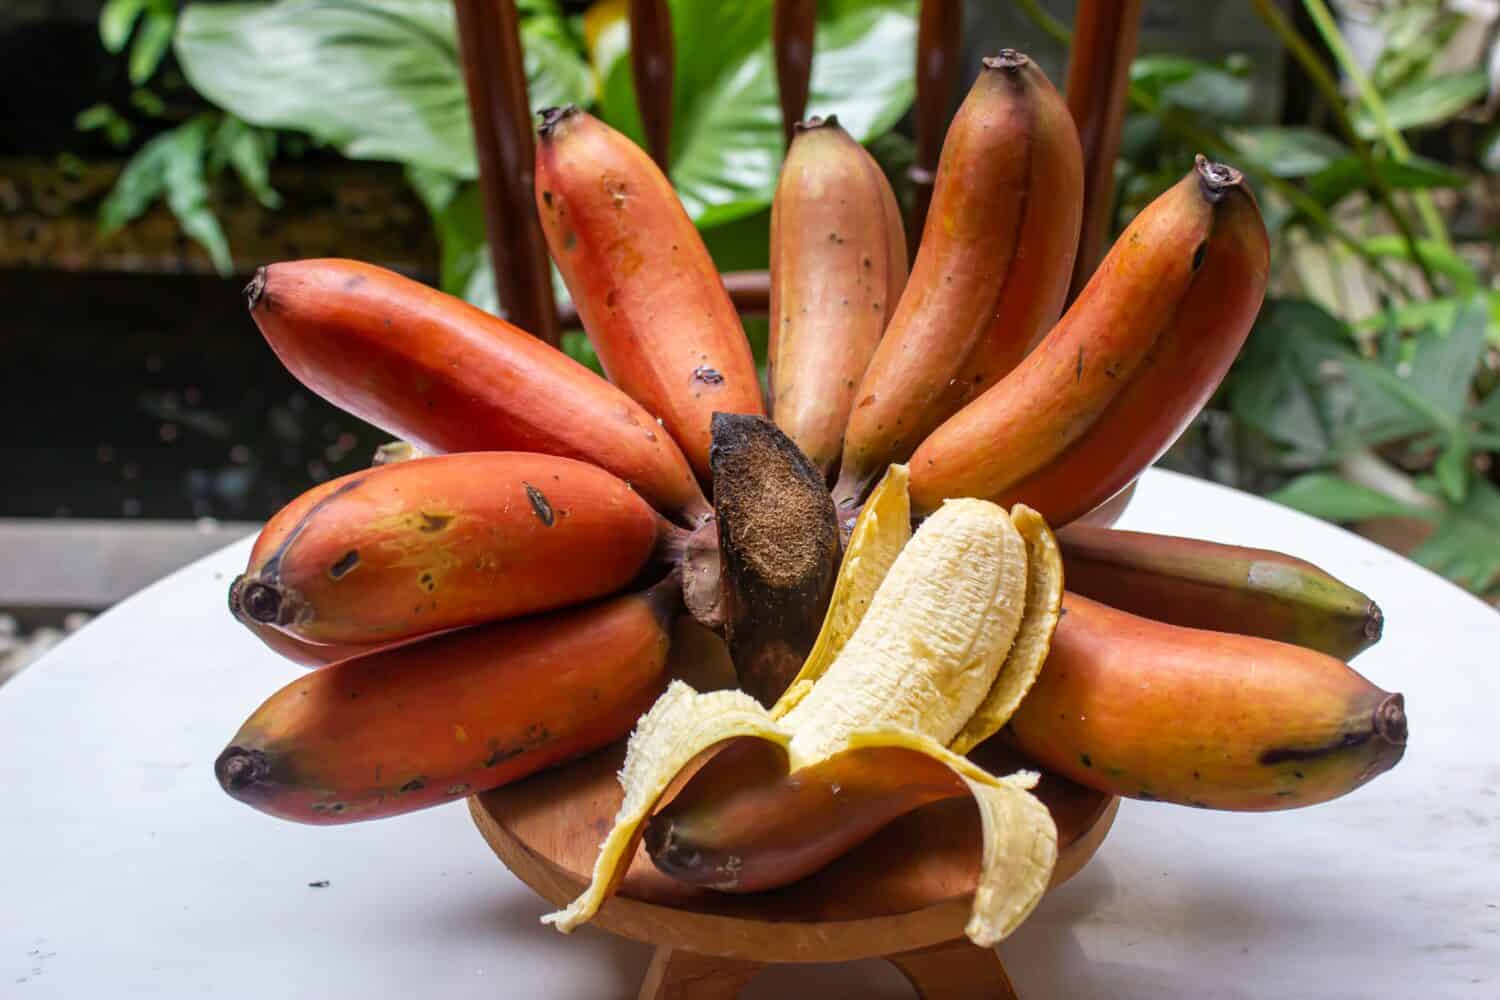 Red bananas are a unique fruit that provides many health benefits.